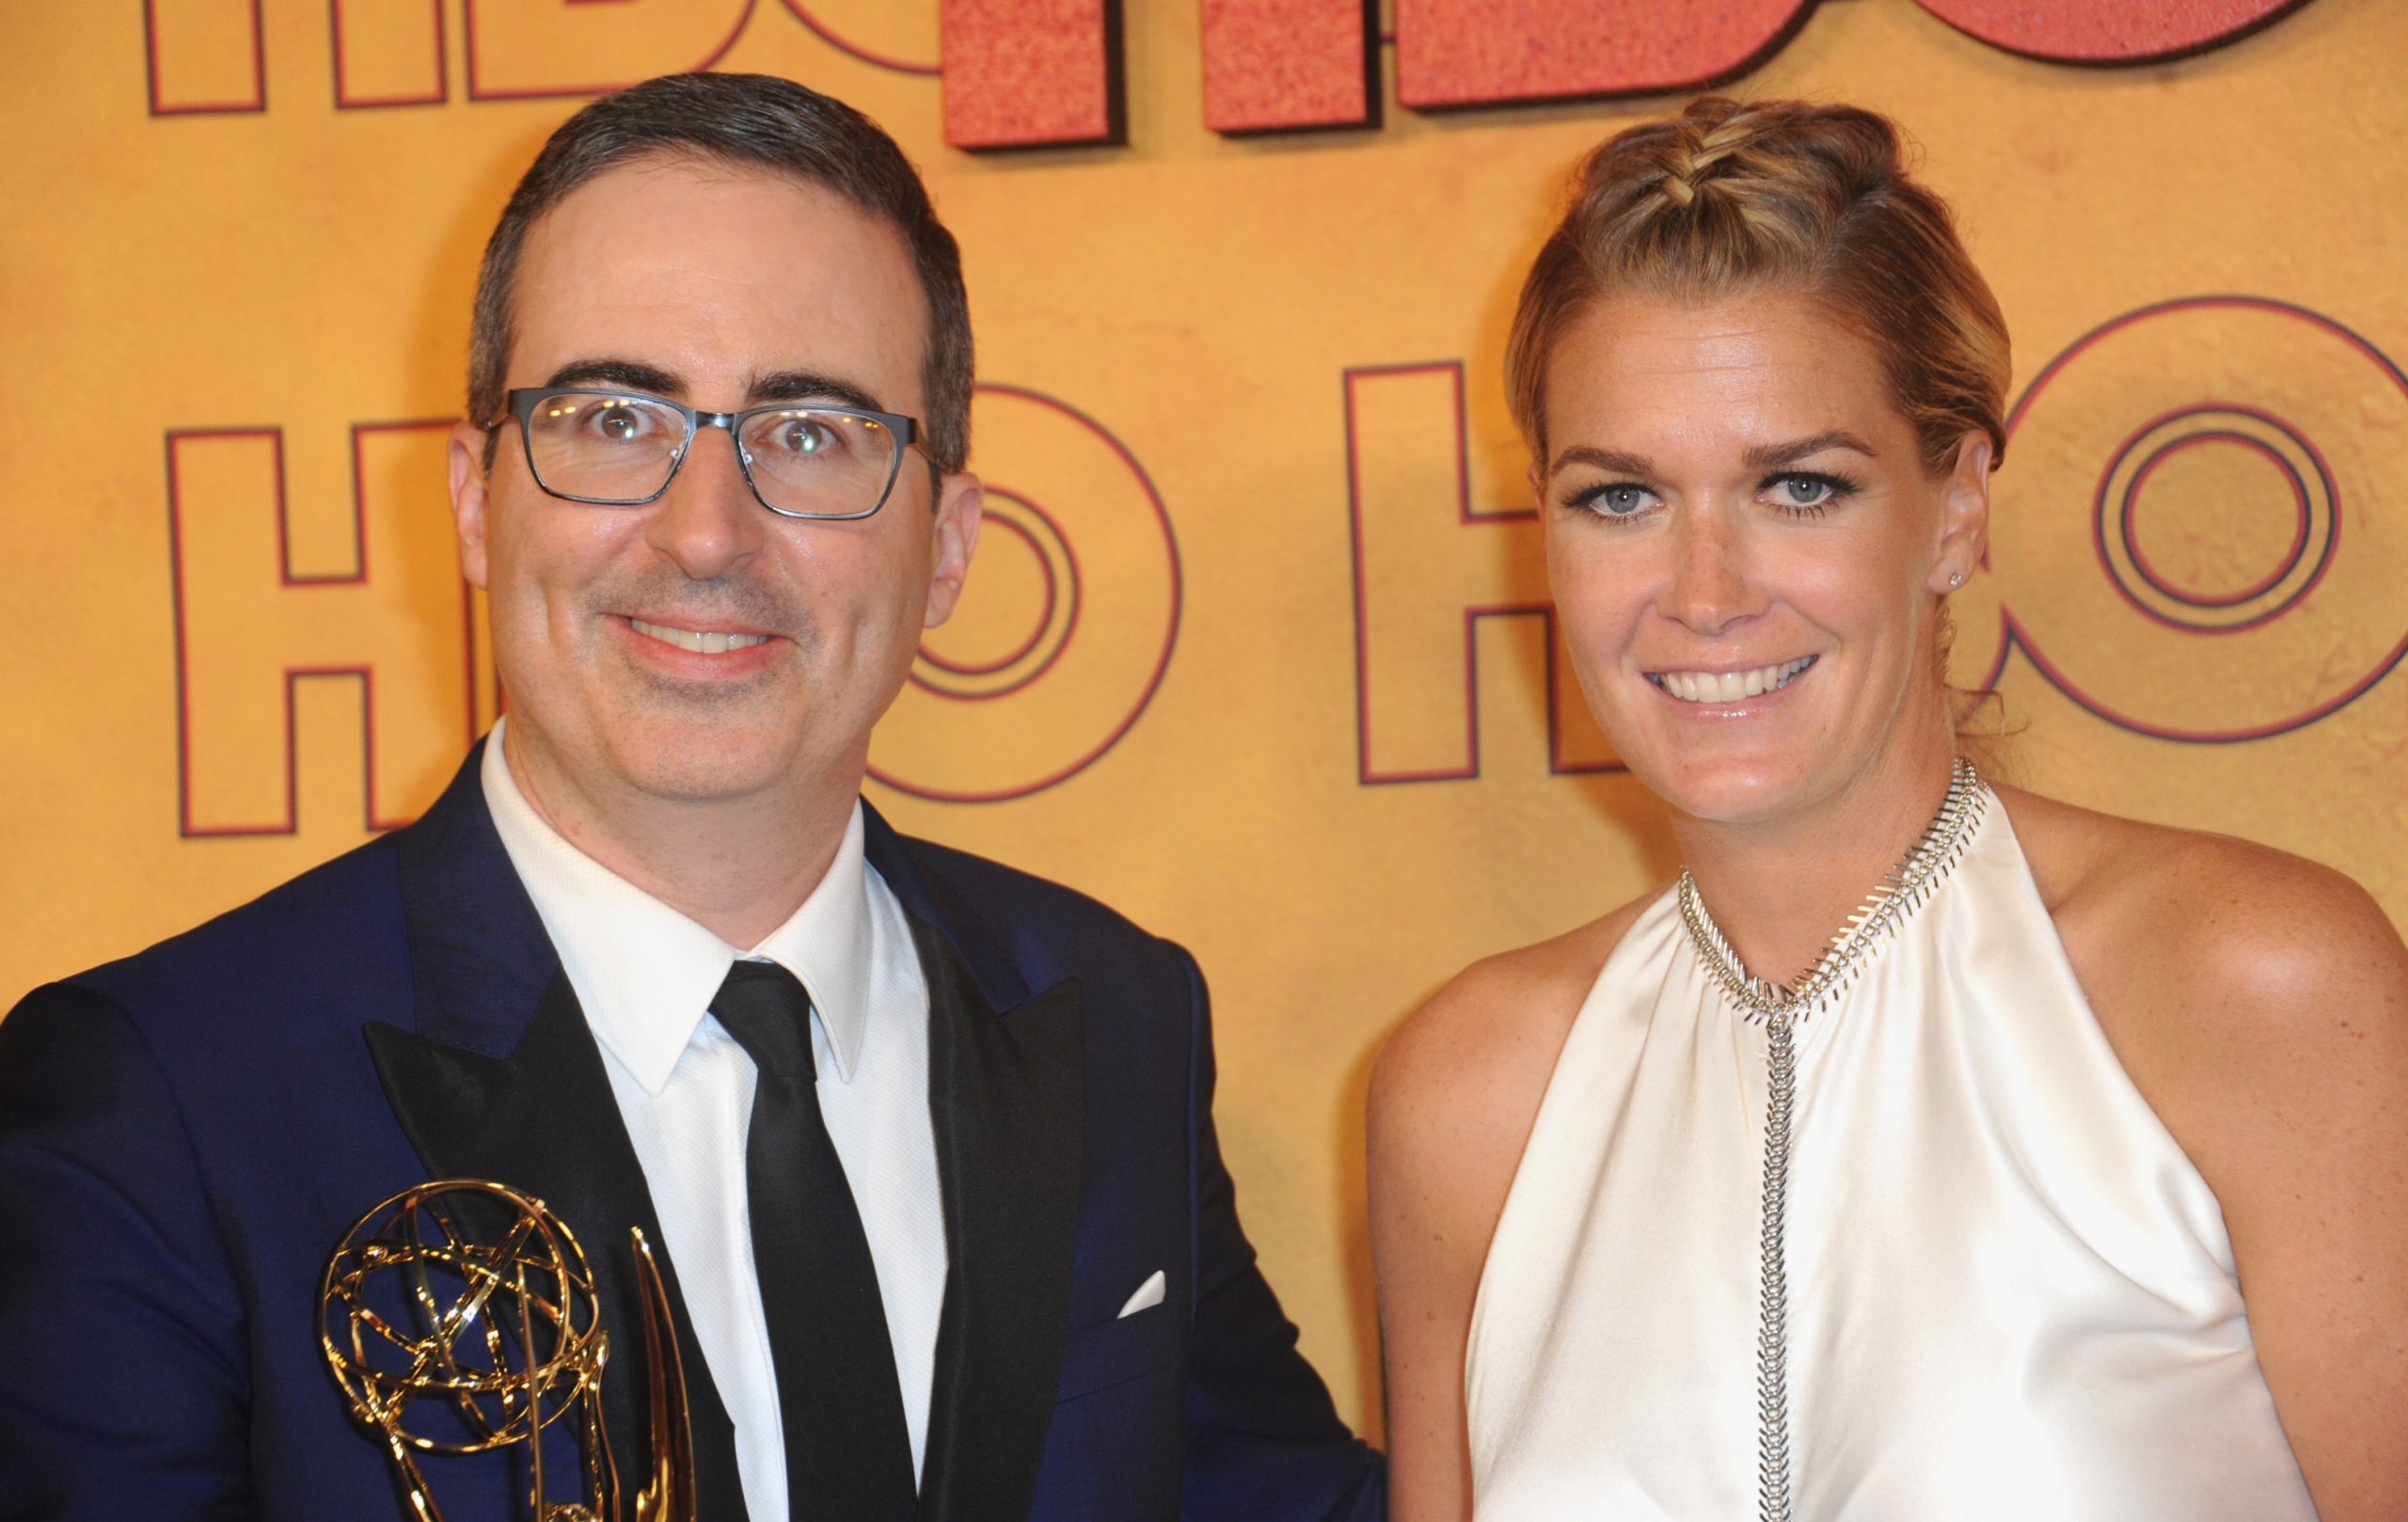 Talk show host John Oliver and wife Kate Norley arrive for the HBO's Post Emmy Awards Reception held at The Plaza at the Pacific Design Center on September 17, 2017 in Los Angeles, California.